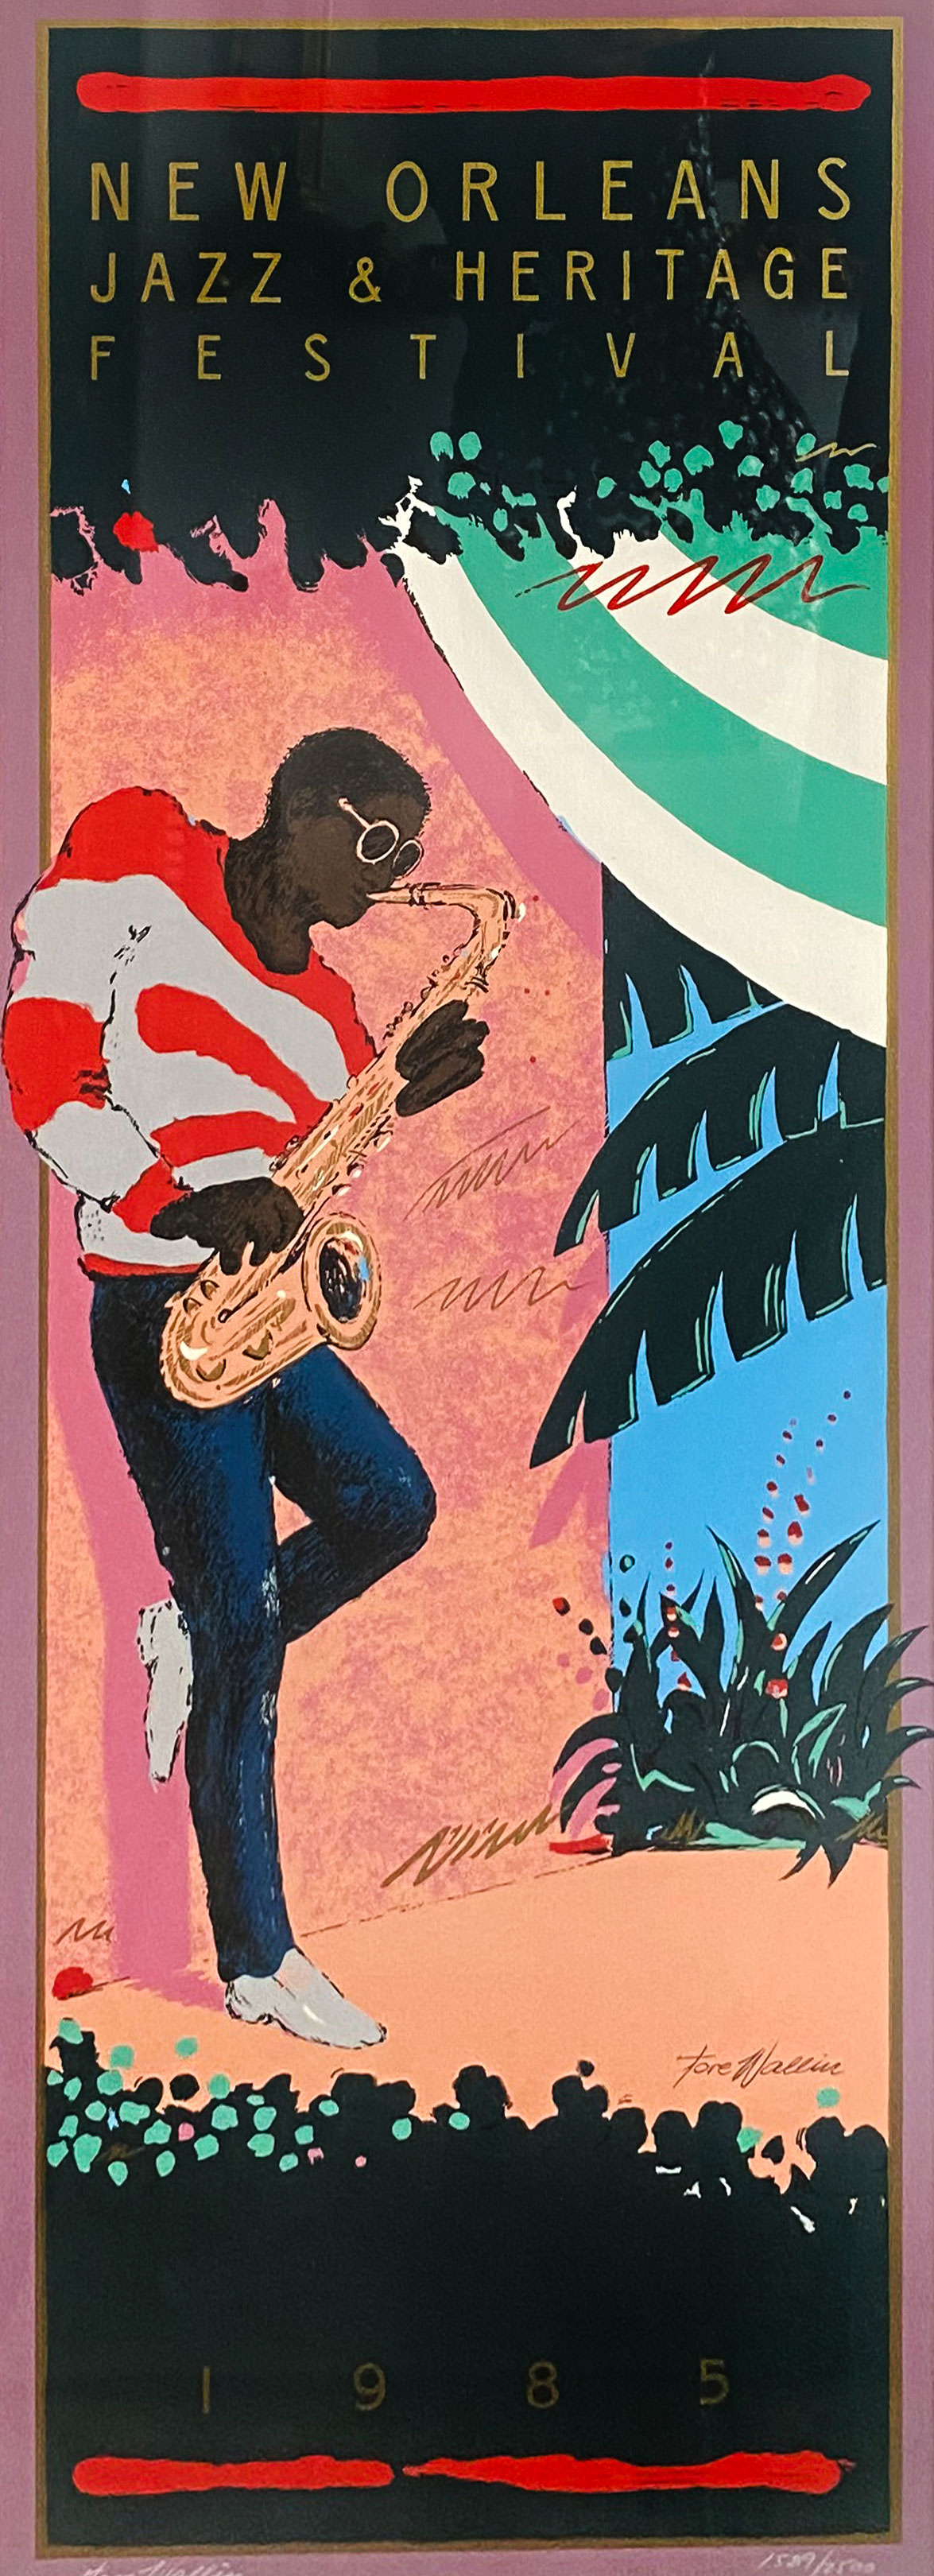 JAZZ POSTER 1985 NEW ORLEANS POSTER